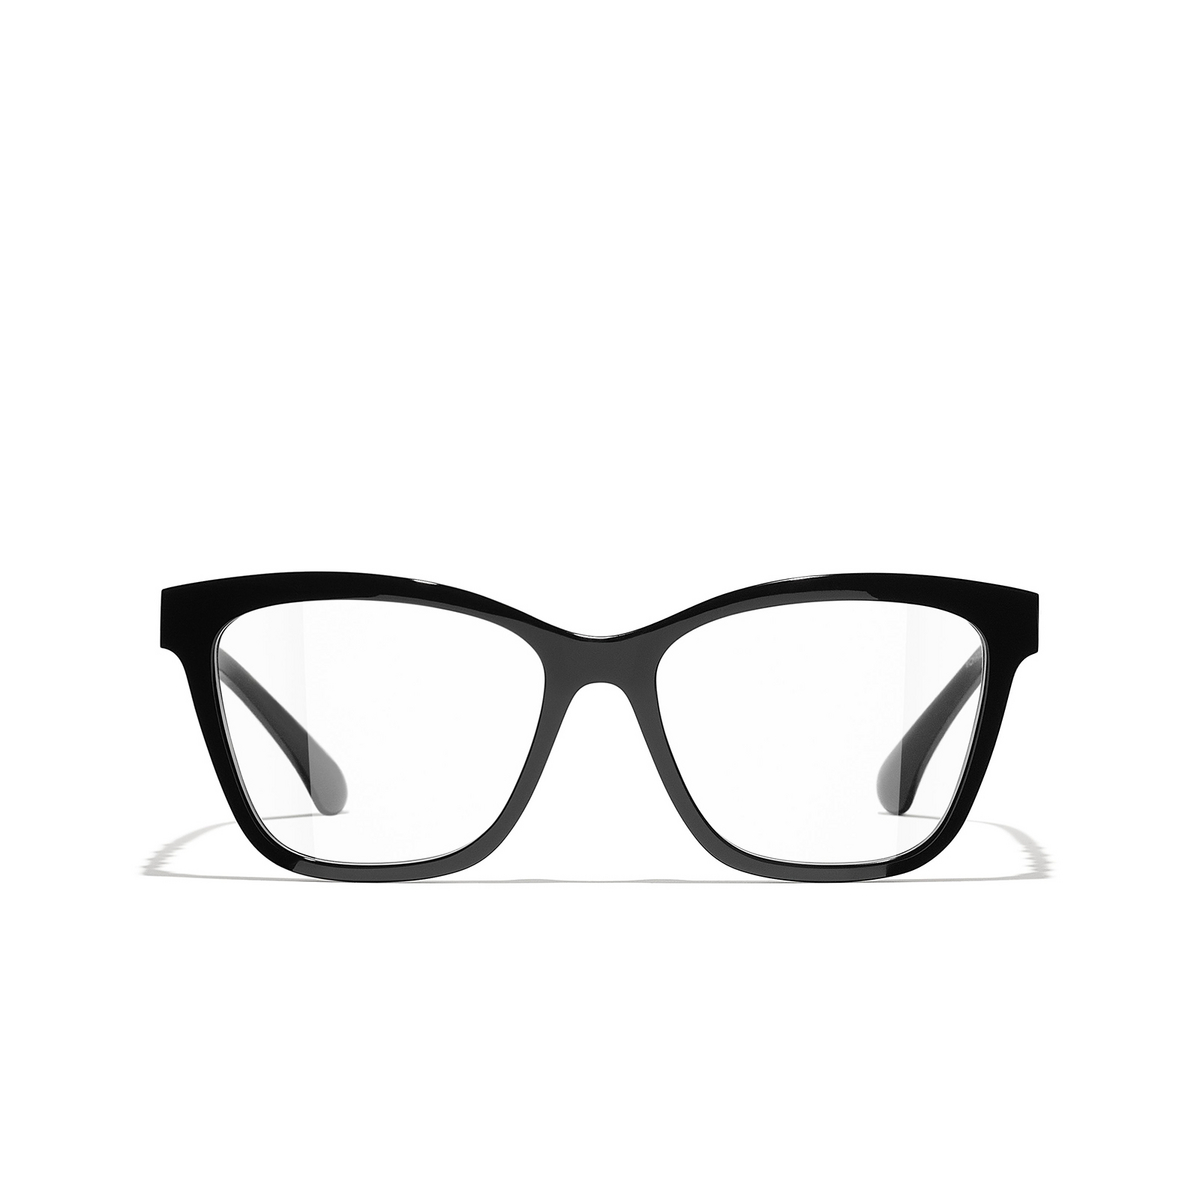 CHANEL square Eyeglasses C622 Black & Gold - front view